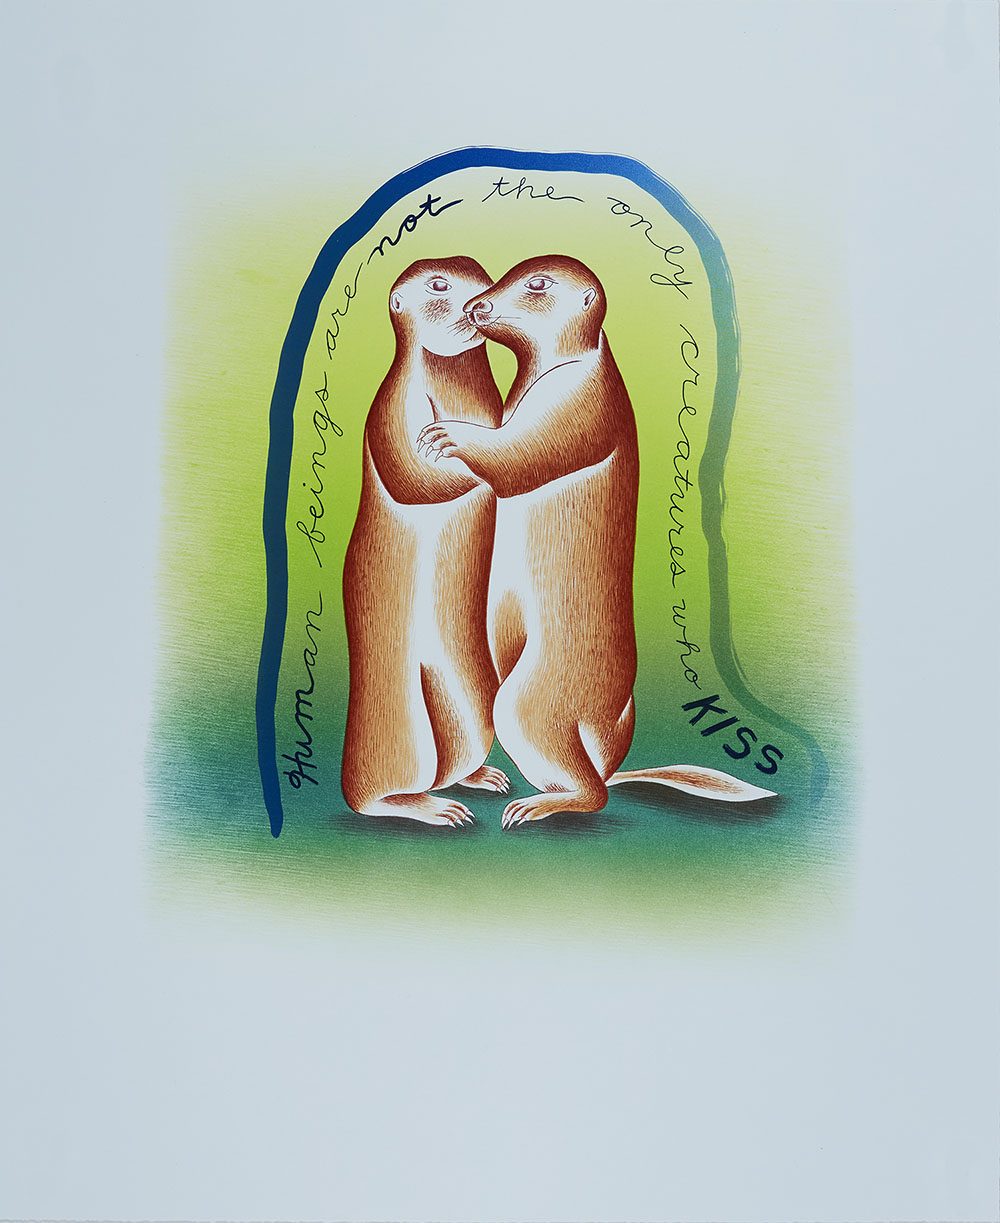 Eleven-color lithograph on Blue Pescia paper by Judy Chicago. Two prairie dogs embrace in a green gradient background. Text forms a border around the prairie dogs and reads "Human beings are not the only creatures who kiss."